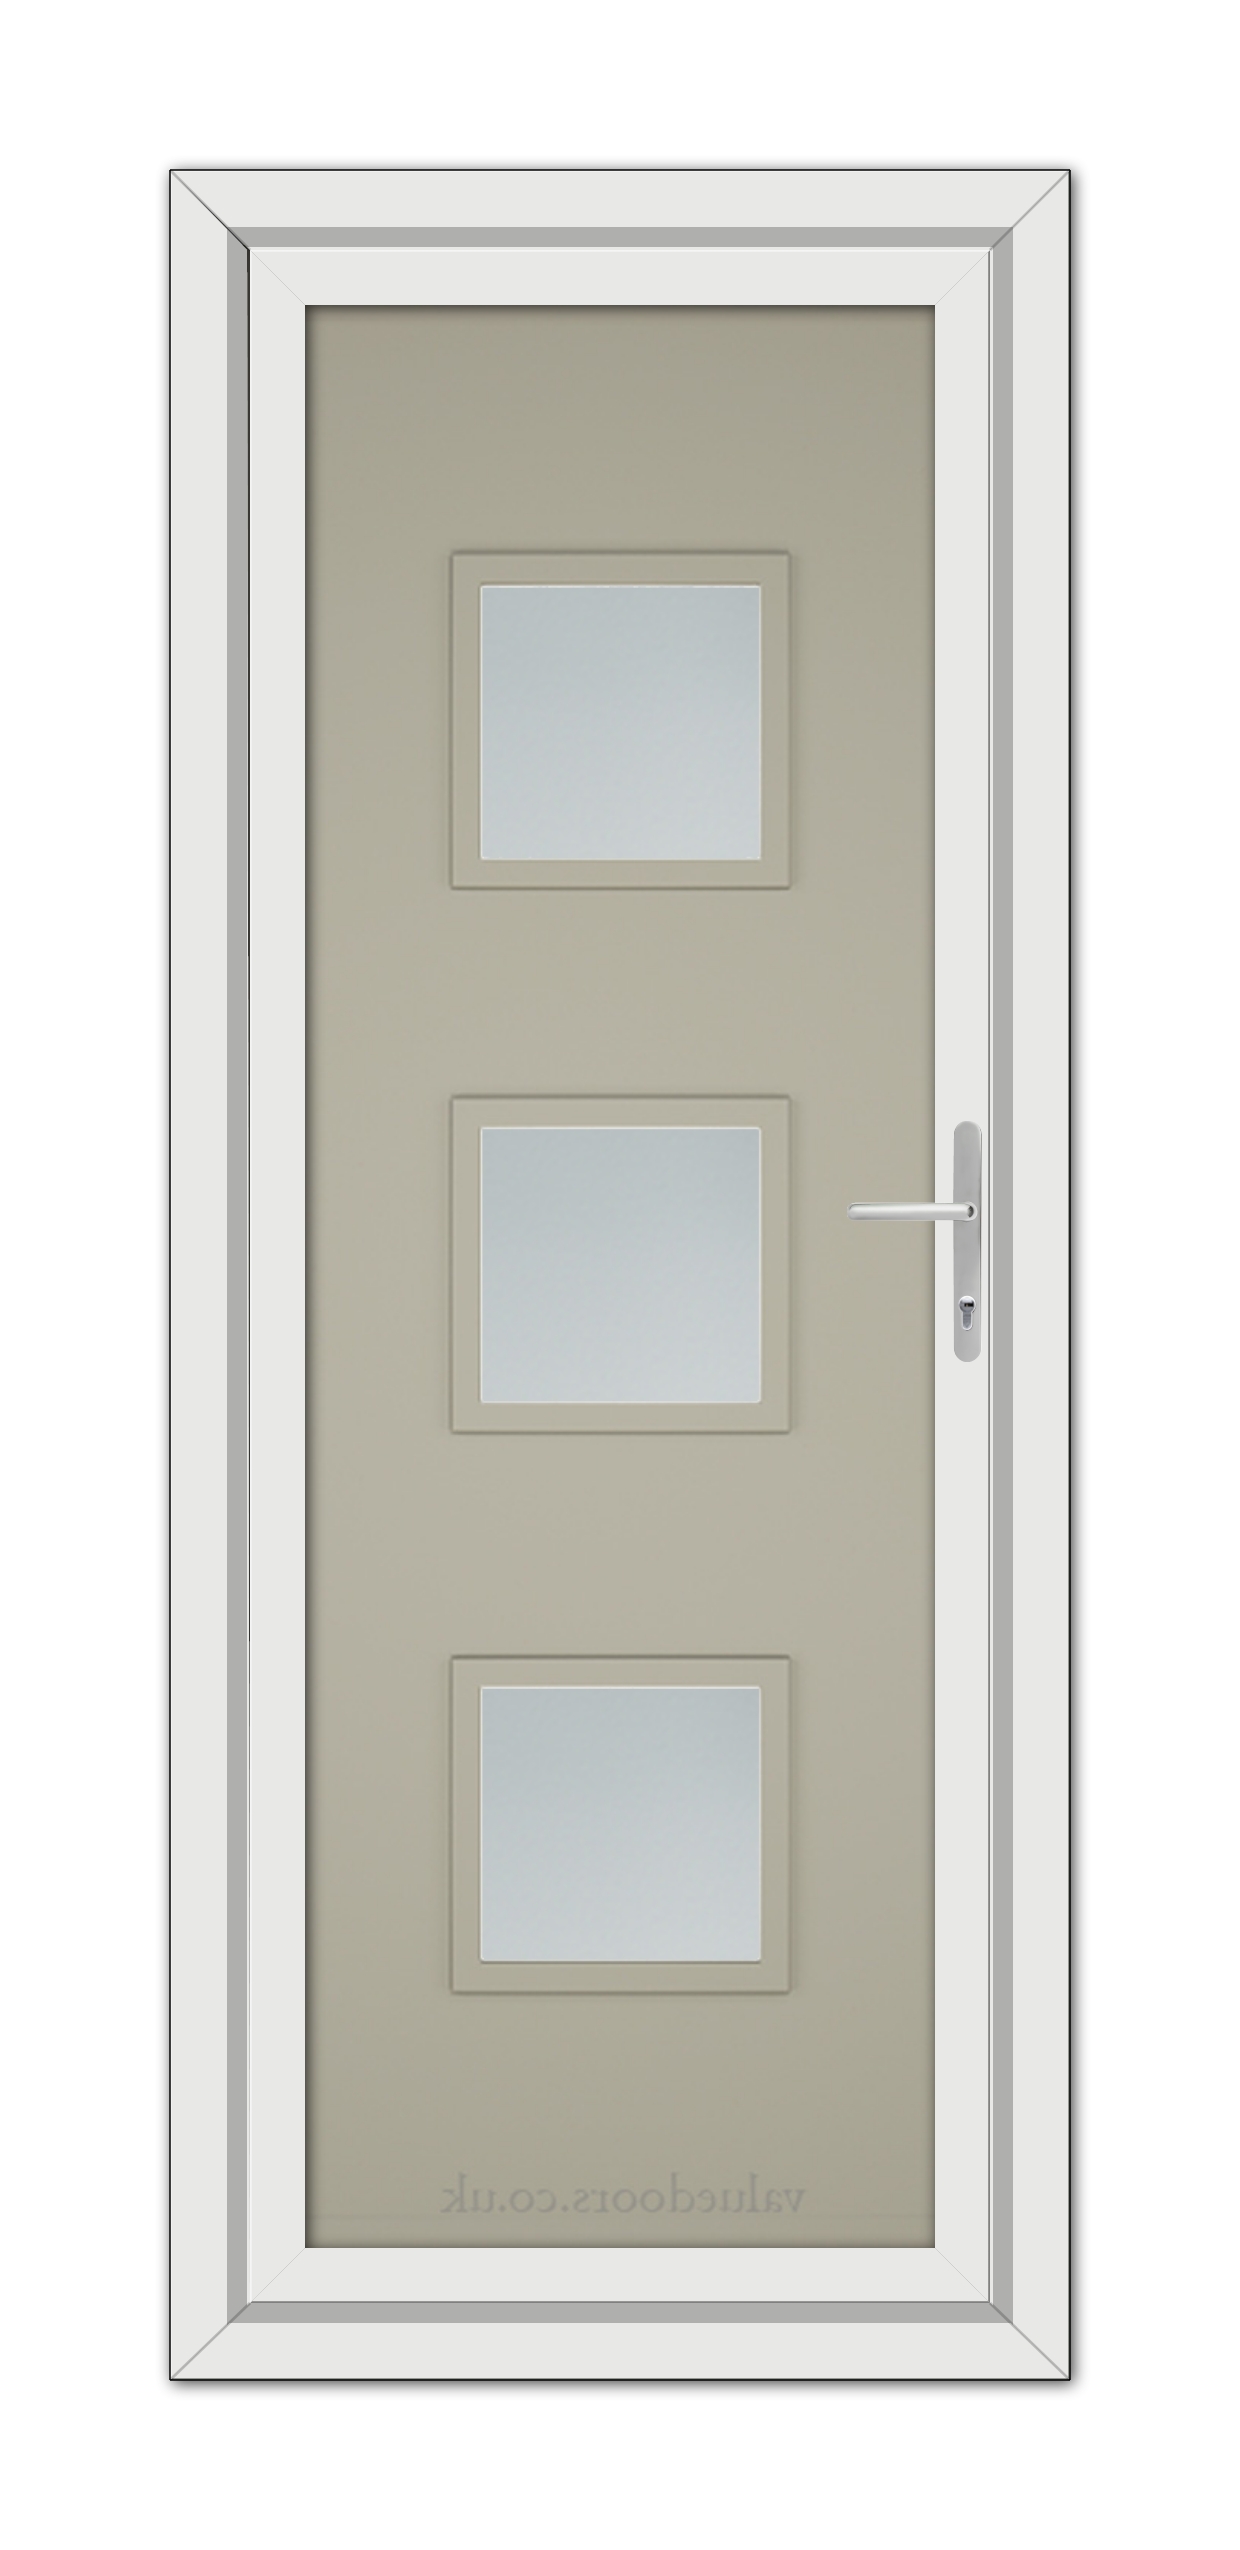 A Pebble Grey Modern 5013 uPVC door with a white frame, featuring three small, evenly-spaced square windows and a silver handle.